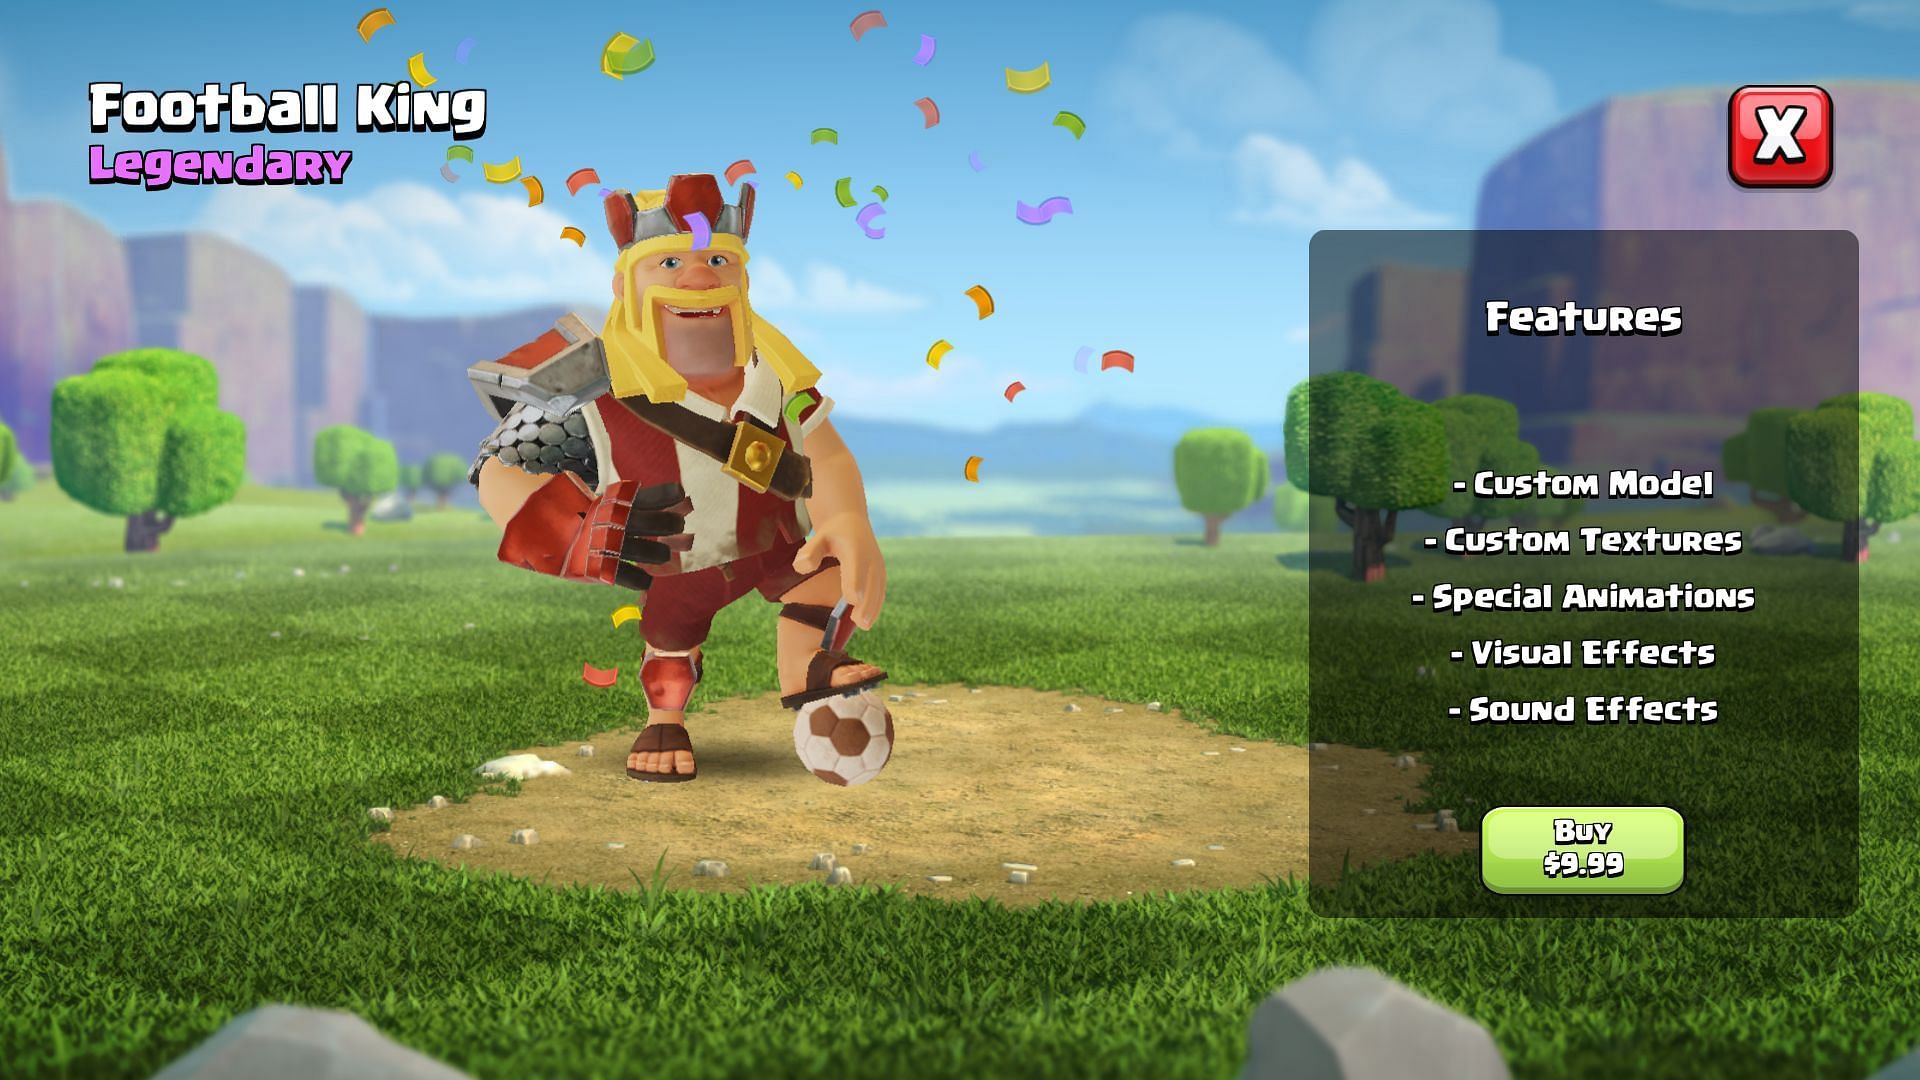 Football King Hero skin features a unique design (Image via Supercell)